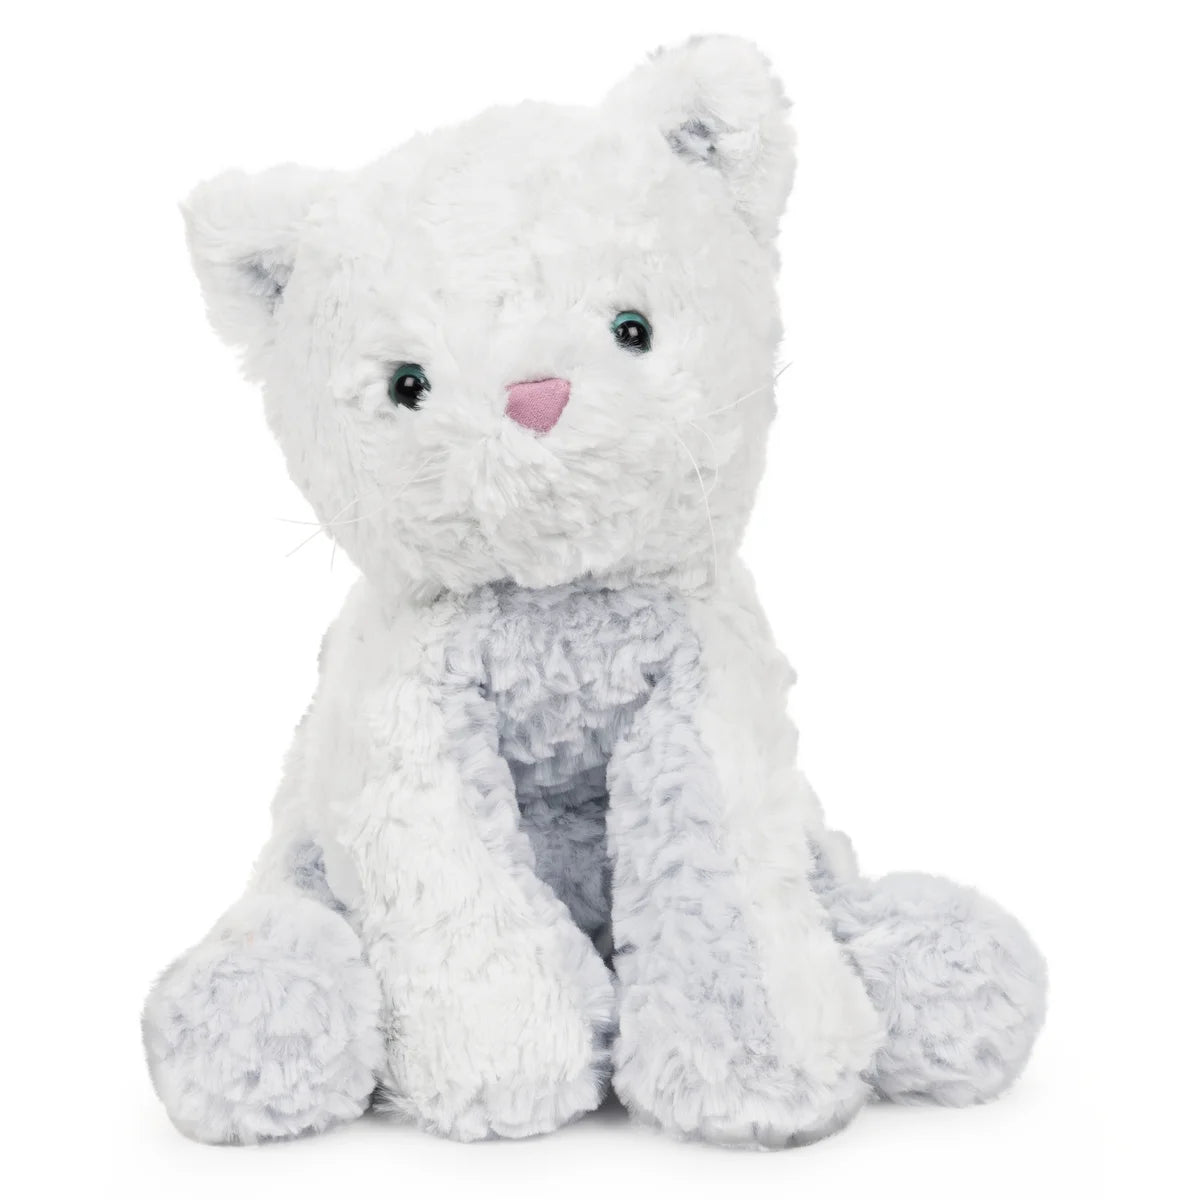 COZYS 10" CAT - Plush Toys HeretoserveyouGUND Cozys Collection Kitty Cat Plush Soft Stuffed Animal for Ages 1 and Up, Blue, 10"